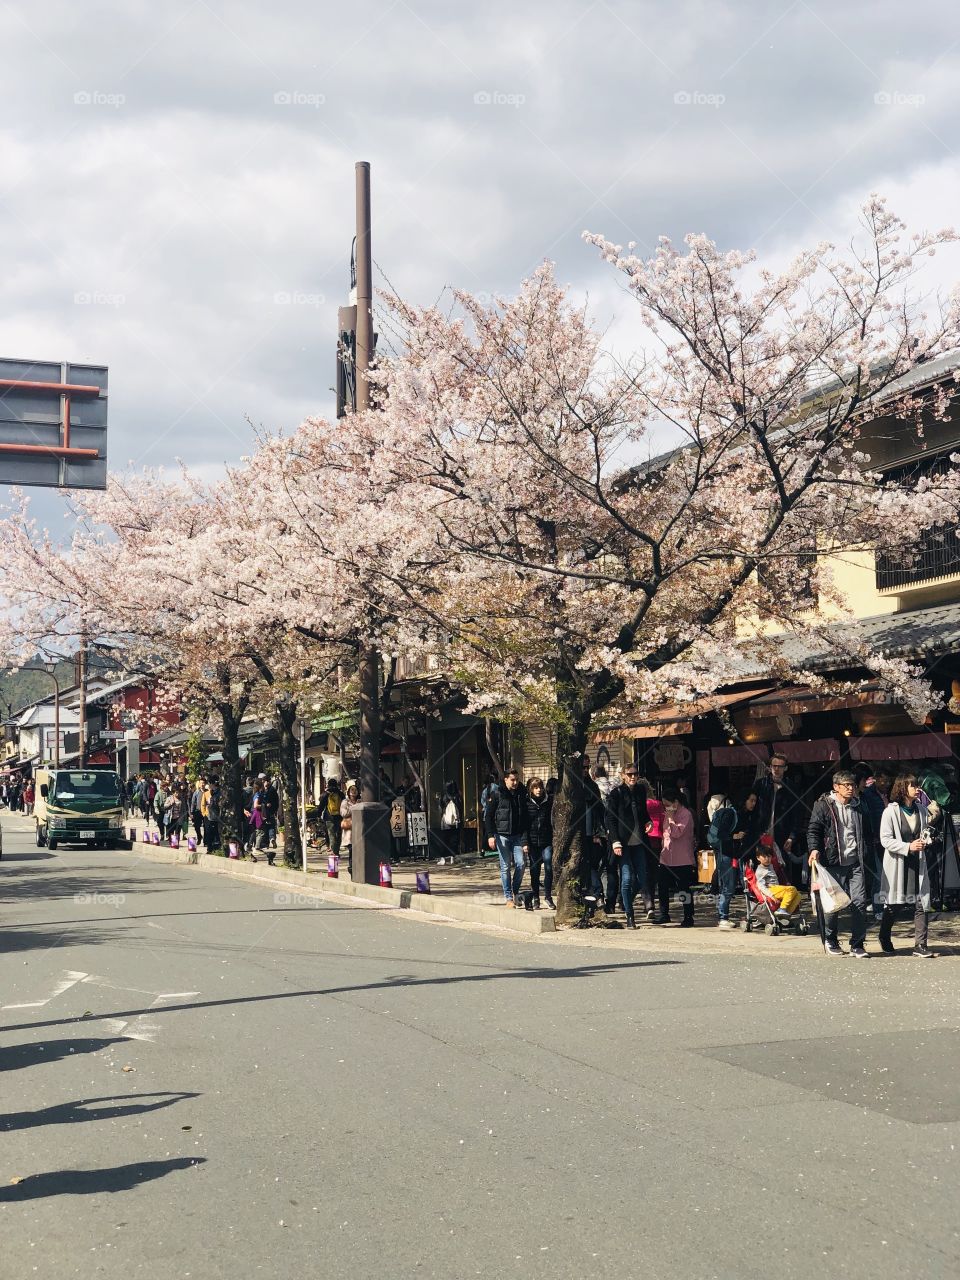 Cherry blossoms on the road